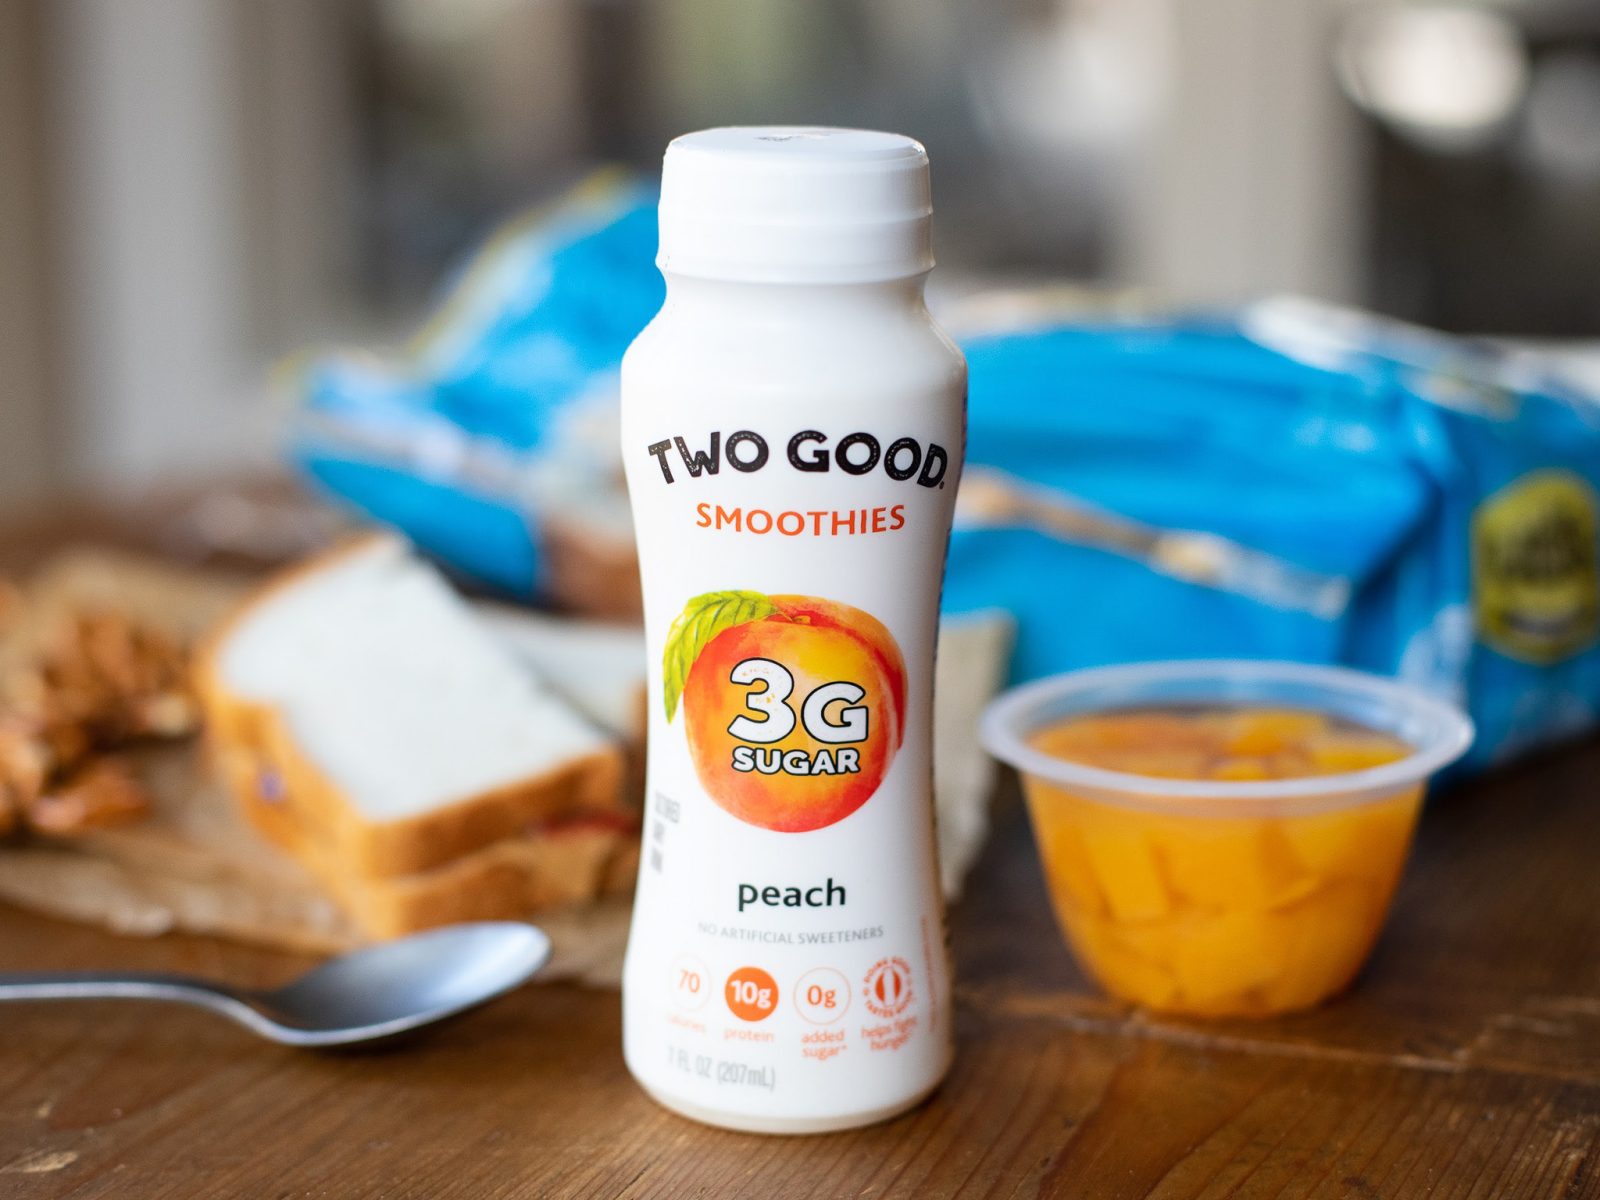 Get Two Good Smoothies For As Low As 49¢ At Kroger